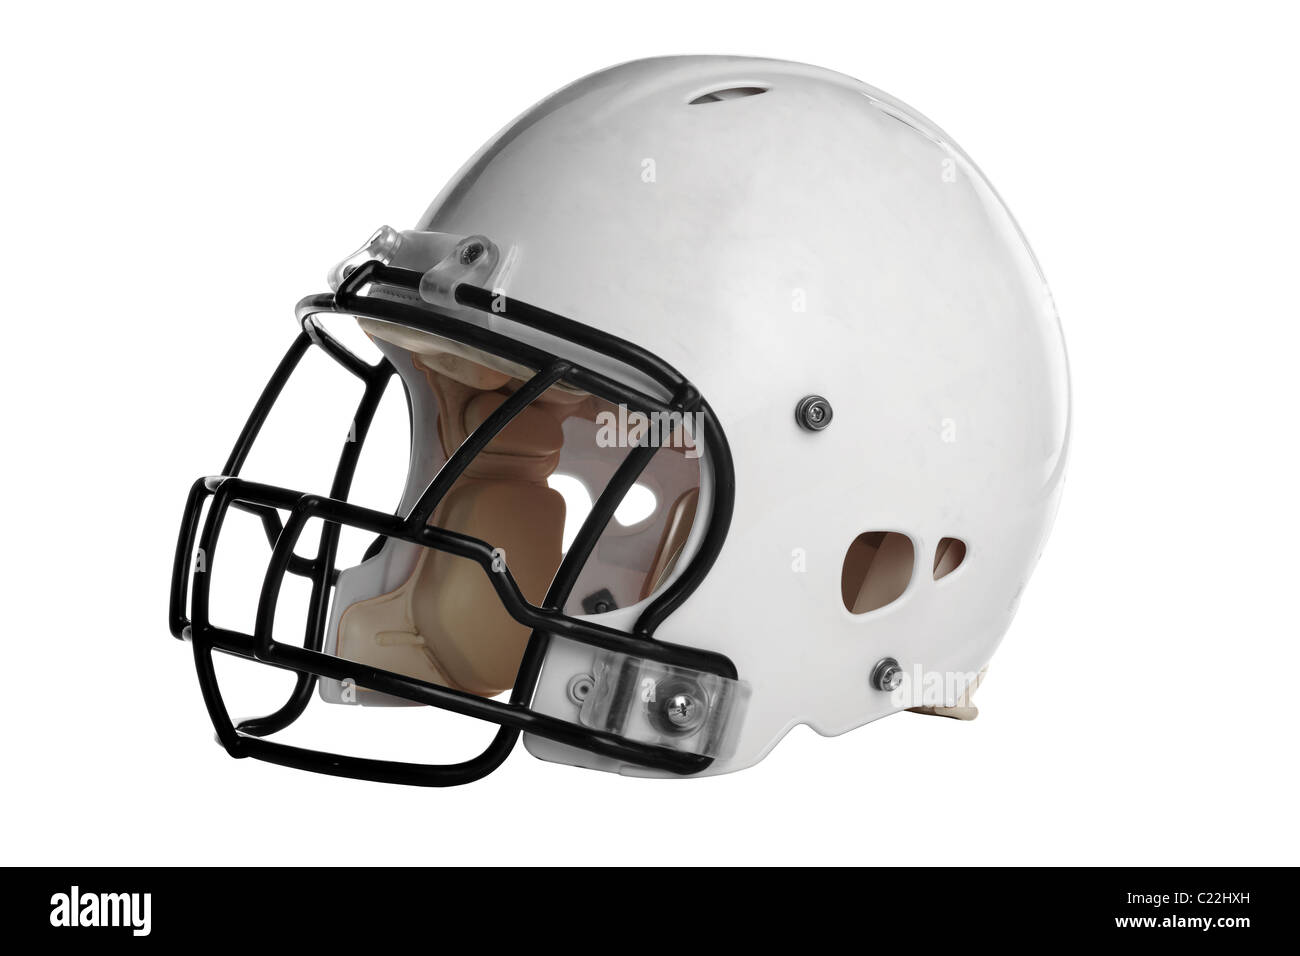 Football helmet isolé sur fond blanc - With Clipping Path Banque D'Images